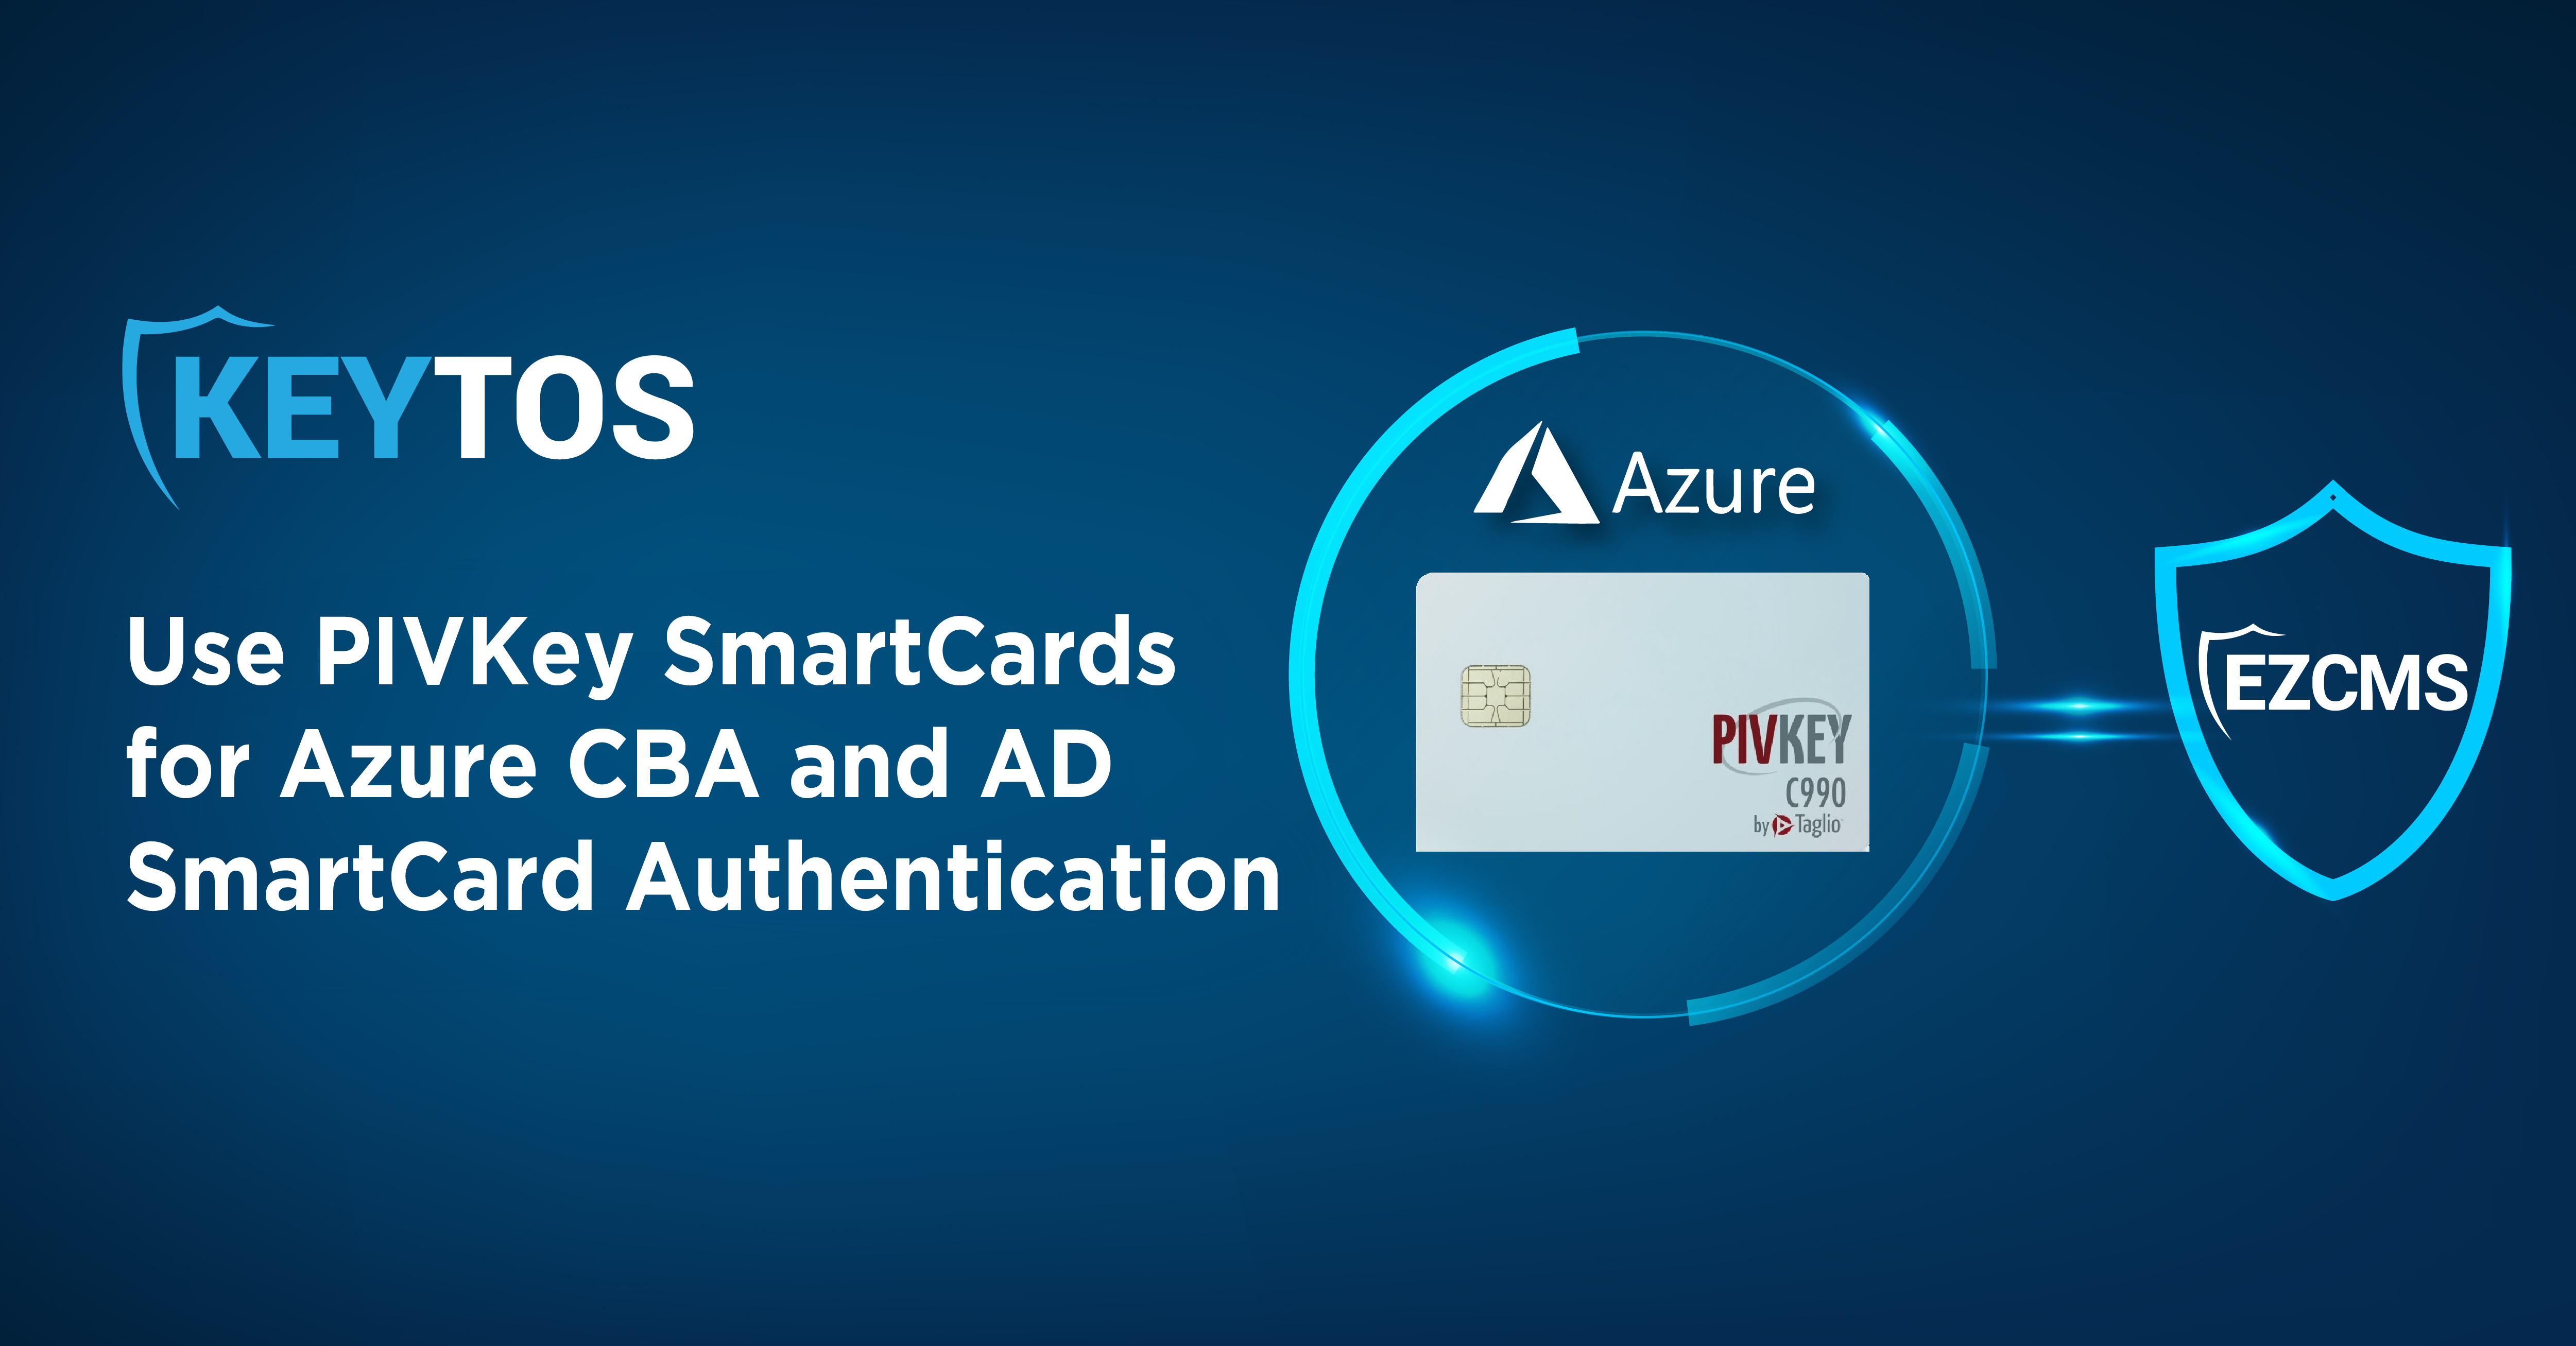 How to Onboard PIVKey Smart Card Certificates for Azure CBA and AD Smart Card Authentication